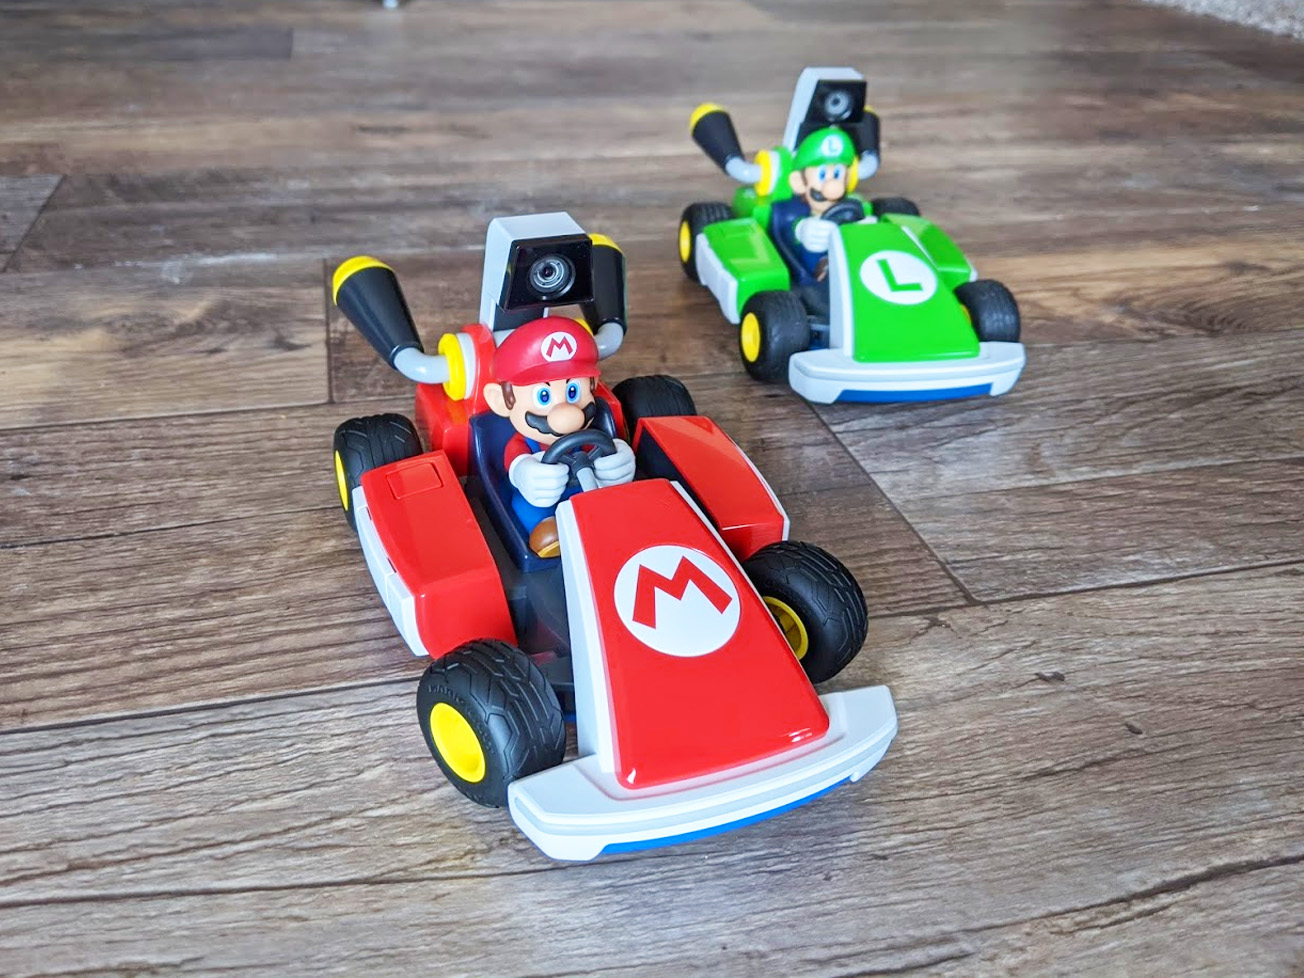 Mario Kart Live: Home Circuit Brings The Series Into The Real